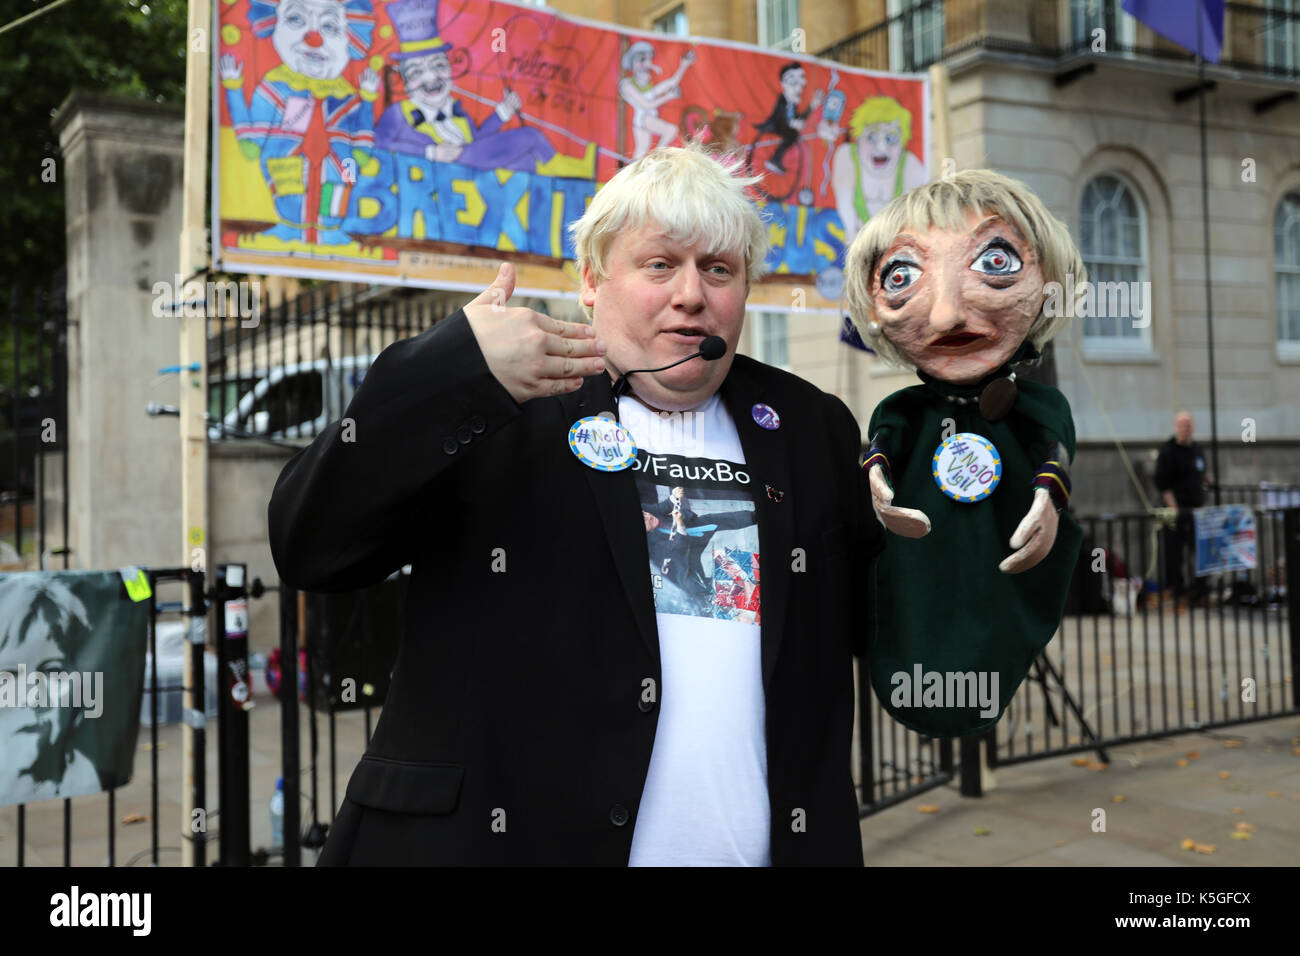 London, UK. 9th Sept, 2017. Drew Galdron performs as FauxBoJo, based on the British Foreign Secretary Boris Johnson, on Whitehall, central London during the People's March for Europe, an anti-Brexit rally, on 9 September 2017 Credit: Dominic Dudley/Alamy Live News Stock Photo